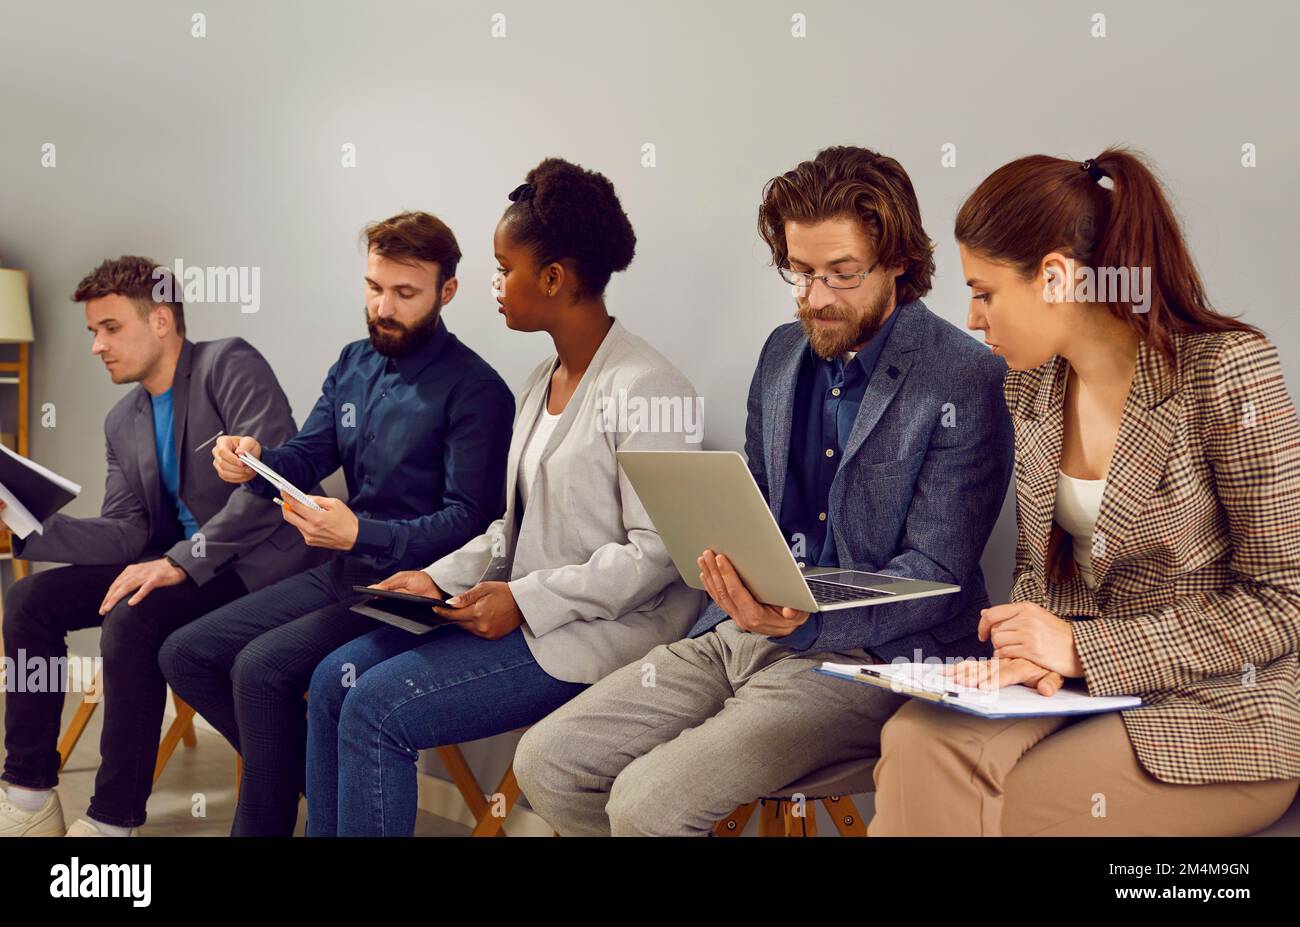 Colleagues talk to each other discussing work issues and information heard during business seminar. Stock Photo